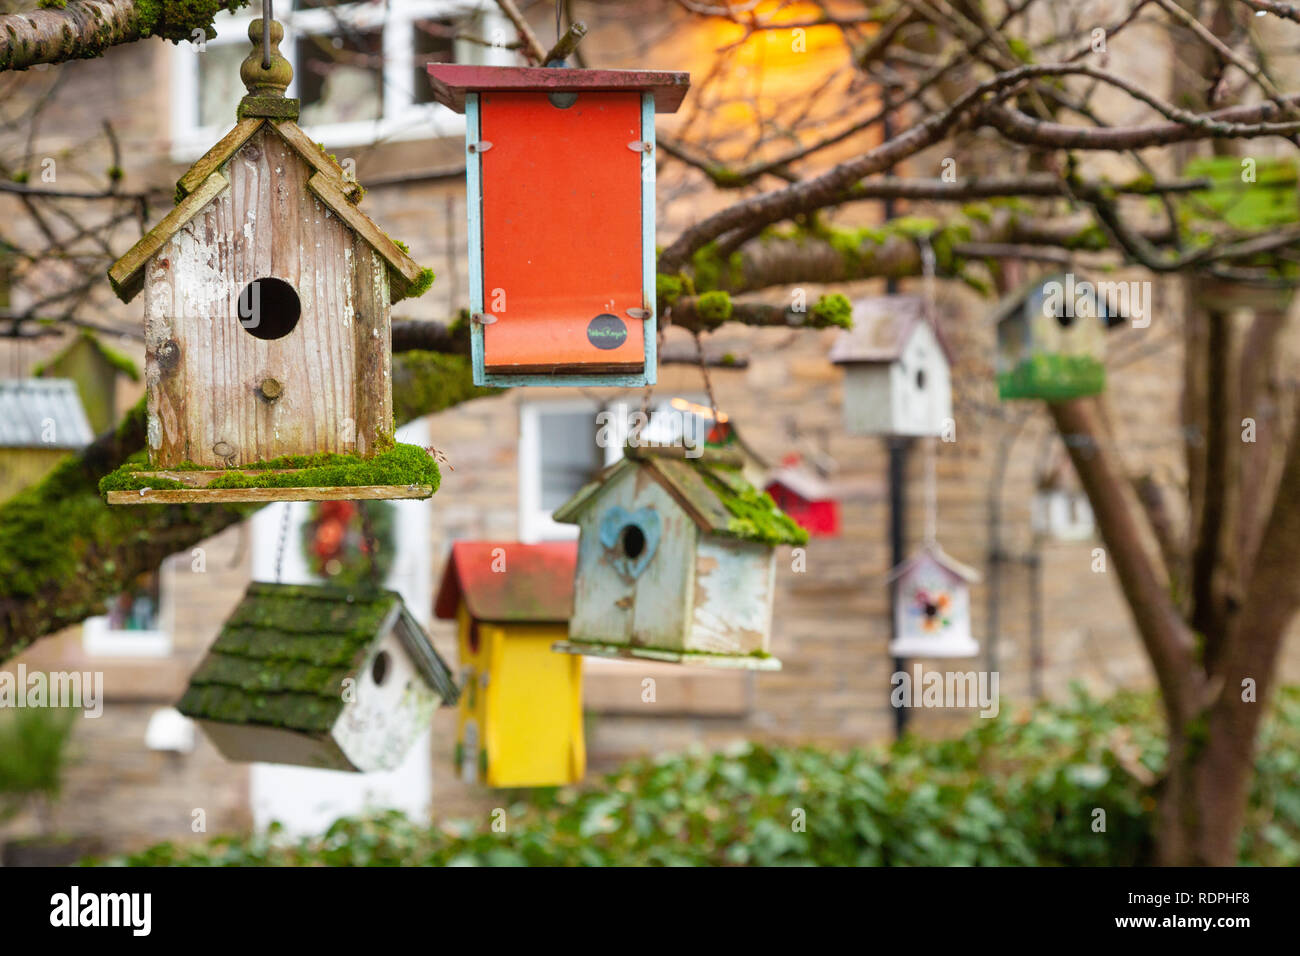 A large collection of wooden bird boxes hanging from a tree. Stock Photo